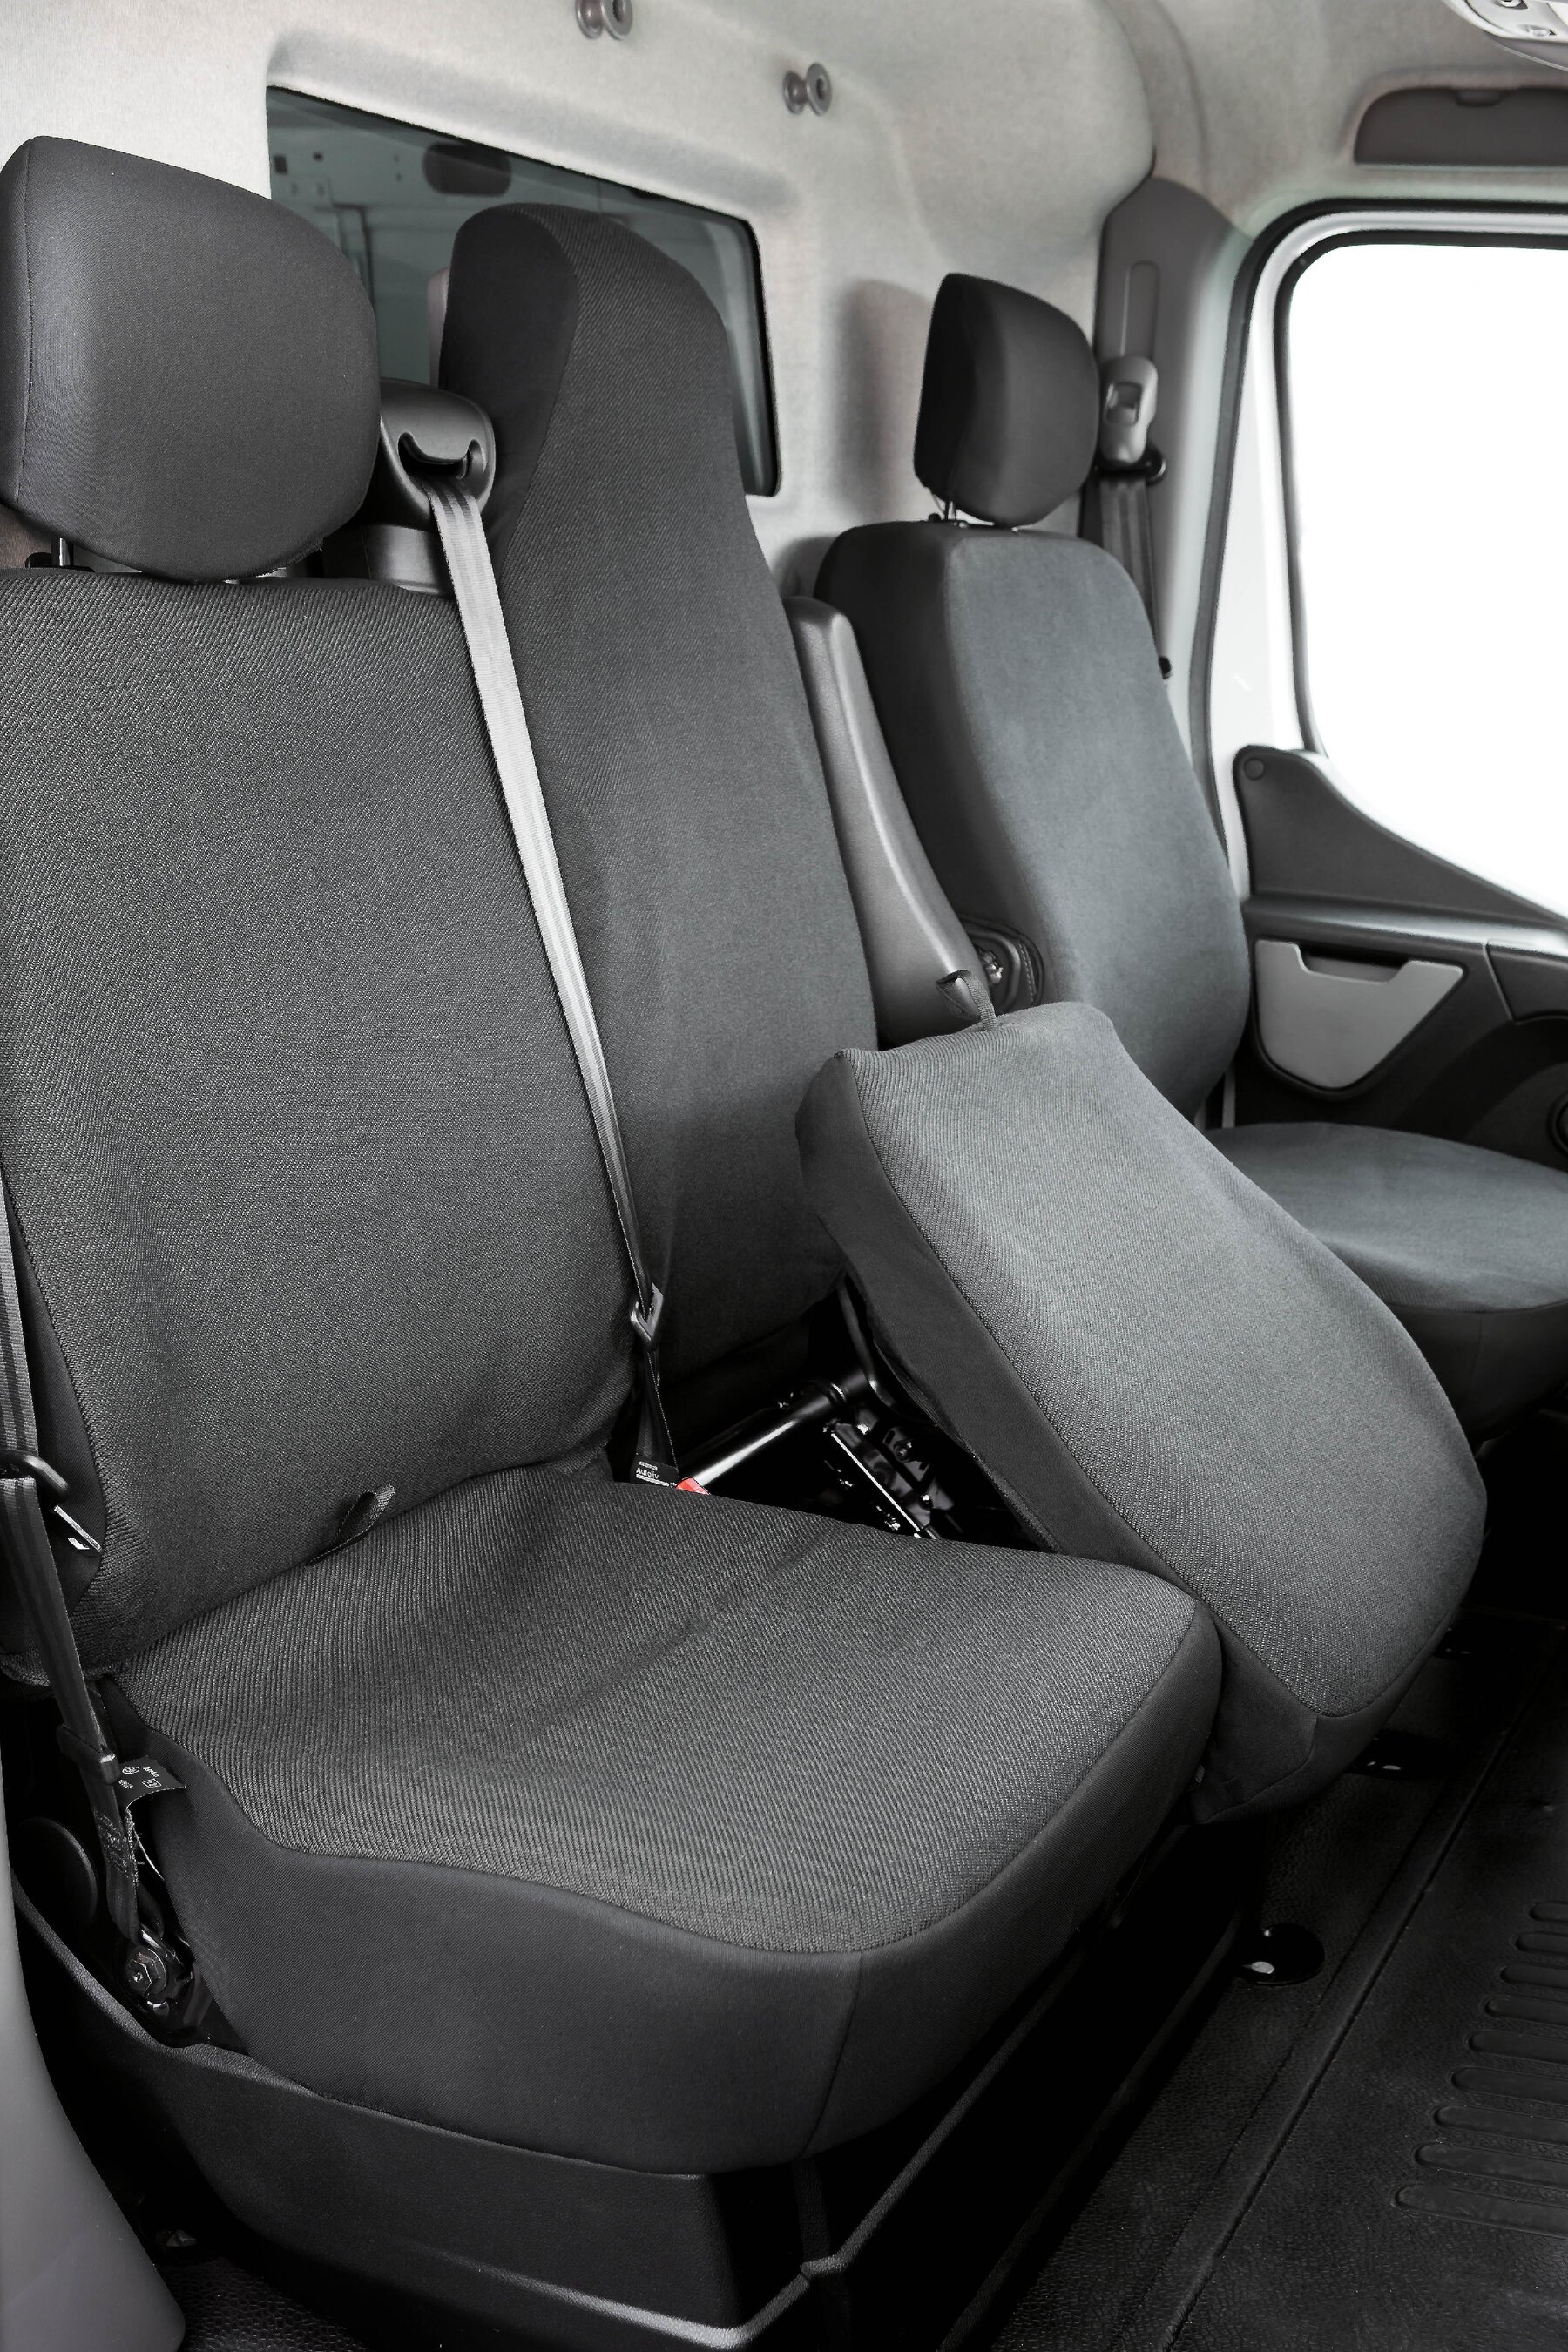 Car Seat cover Transporter made of fabric for Opel Movano, Renault Master, Nissan Interstar, single & double seat